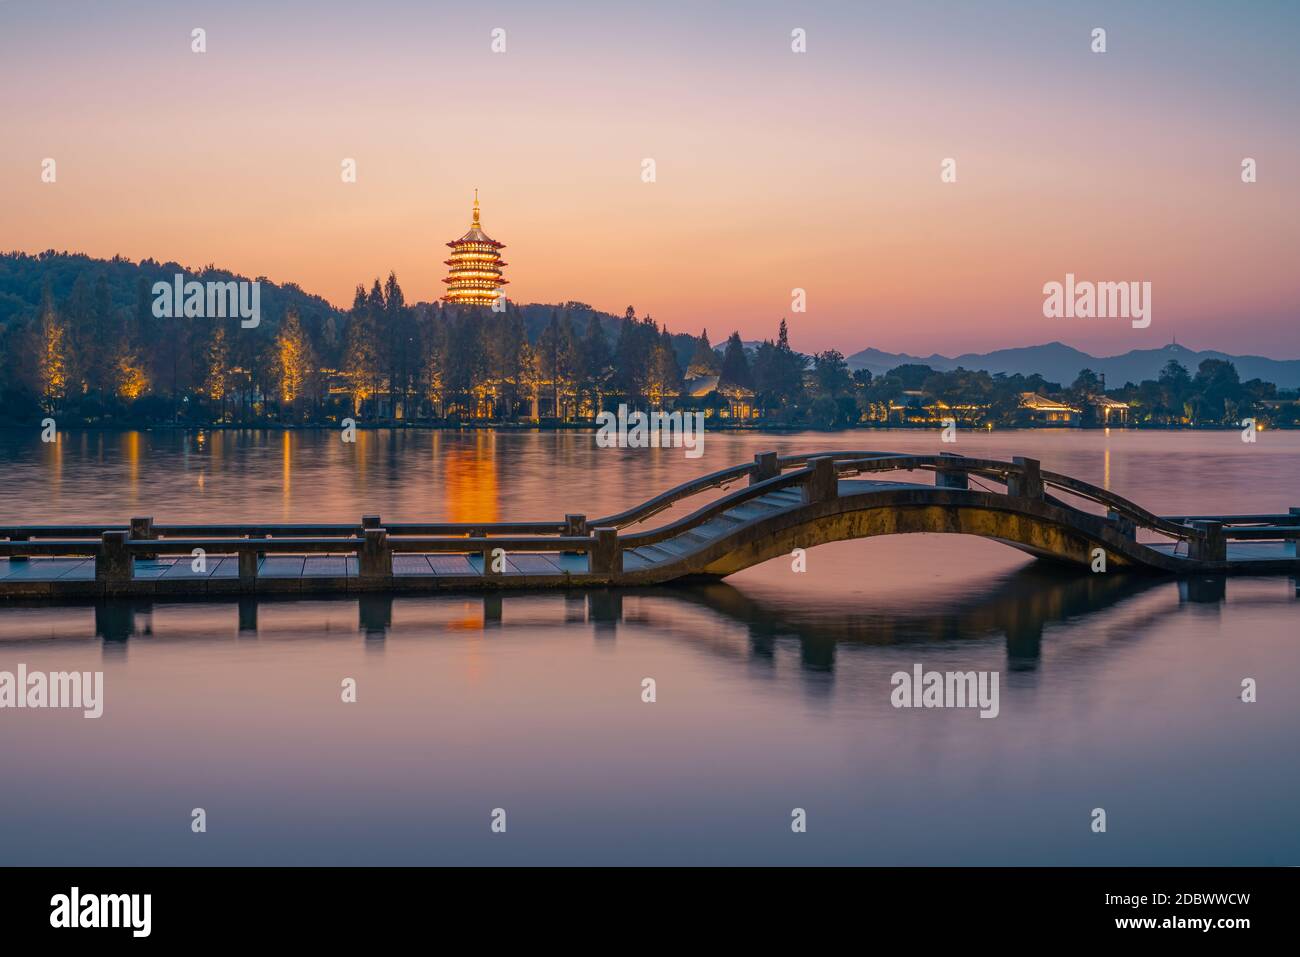 Sunset view of the Chinese architecture at the West Lake in Hangzhou, China. Stock Photo